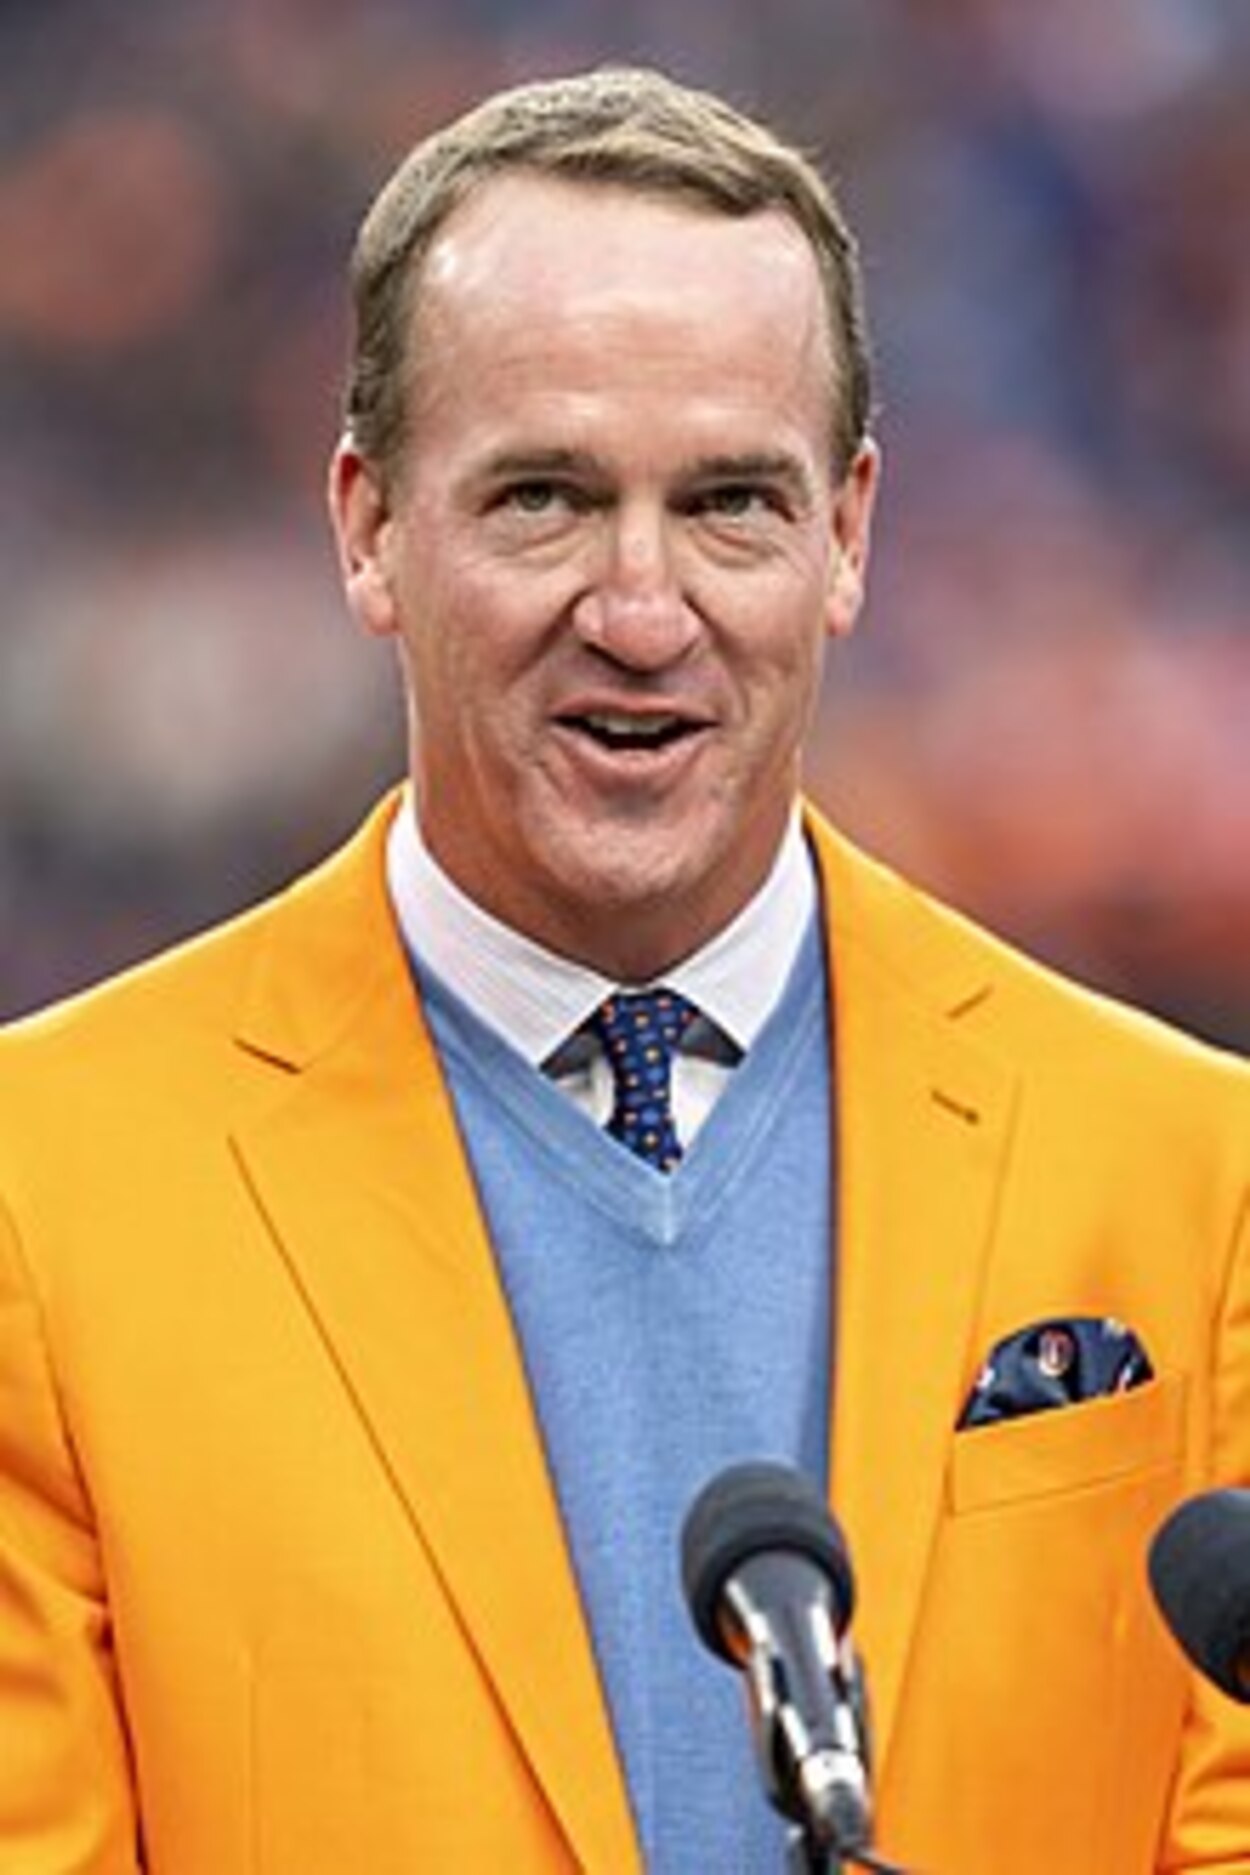 Where Does Peyton Manning Live? (Find Out!)